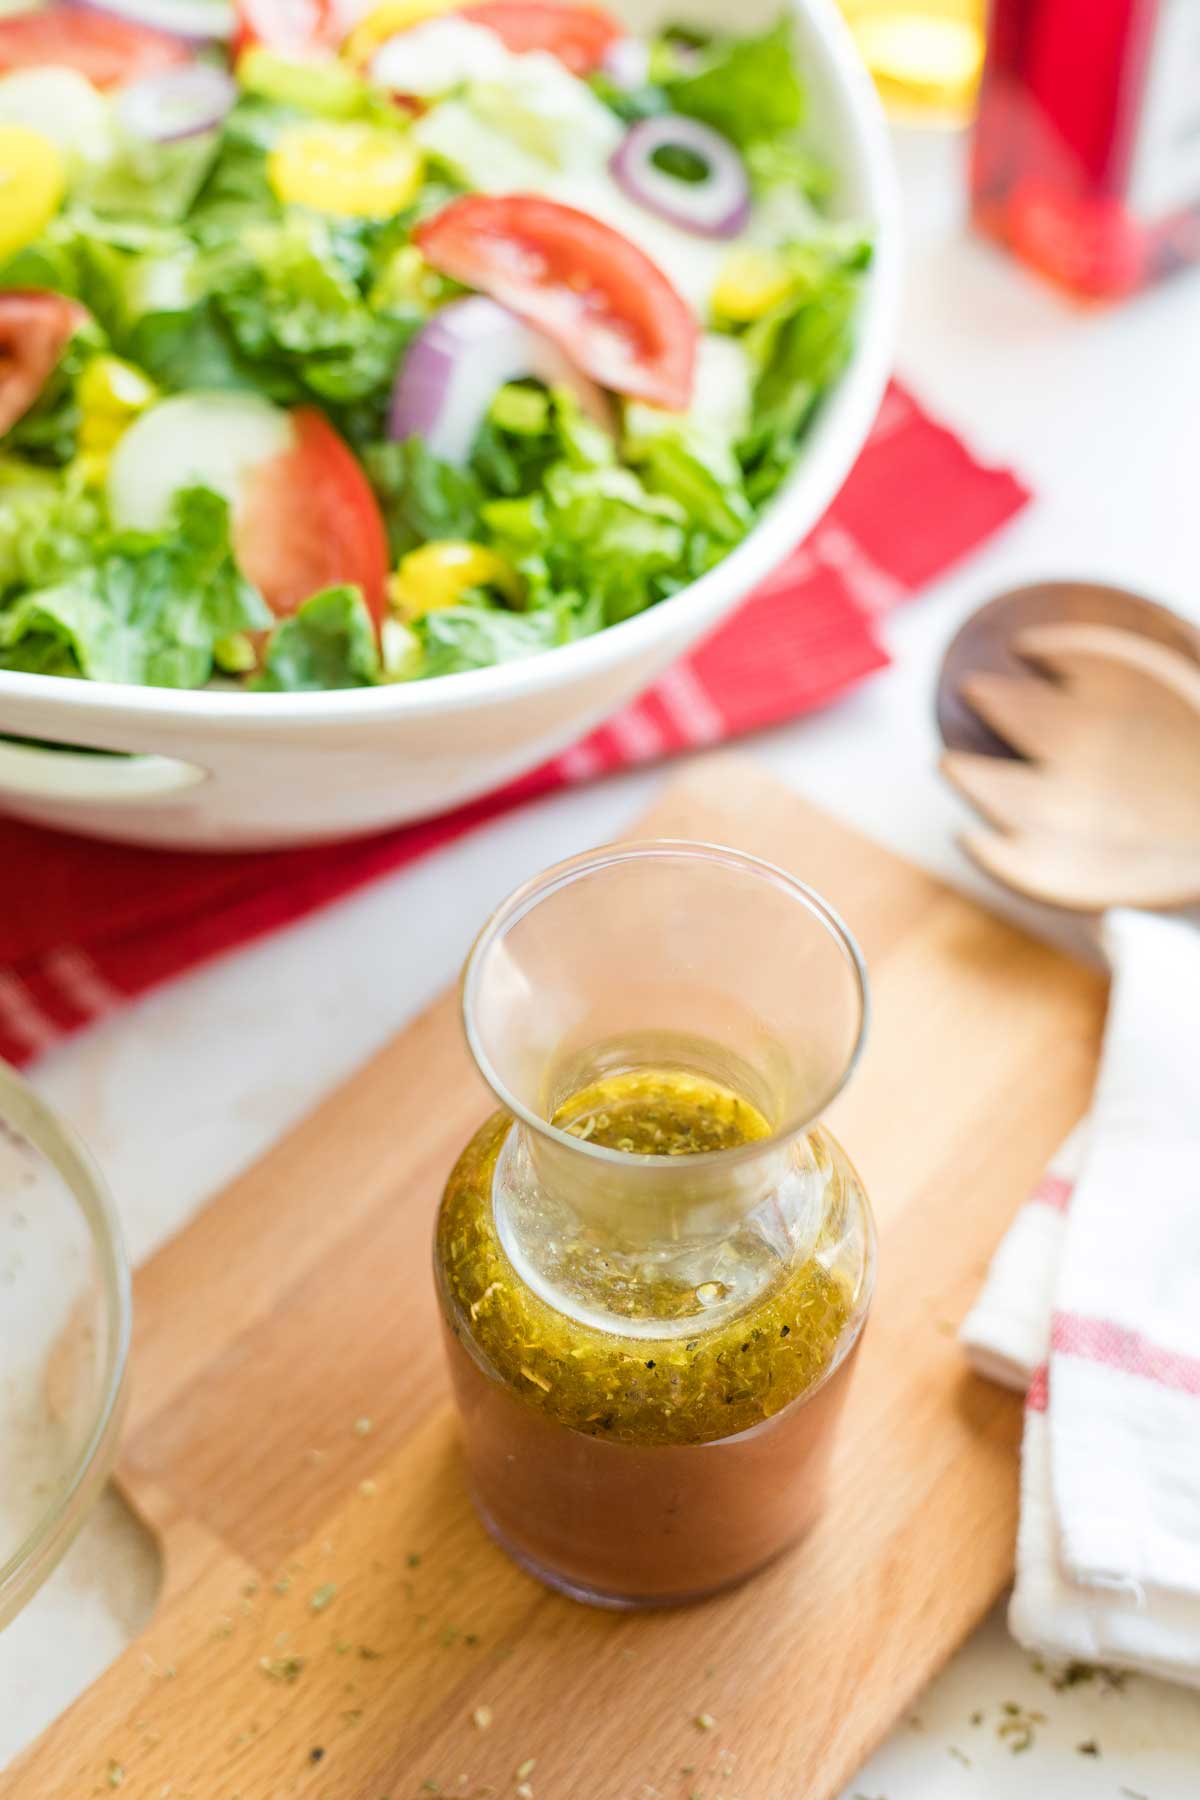 Looking down into bottle of vinaigrette on wooden board, with Italian salad, servers and bottle of red wine vinegar surrounding.